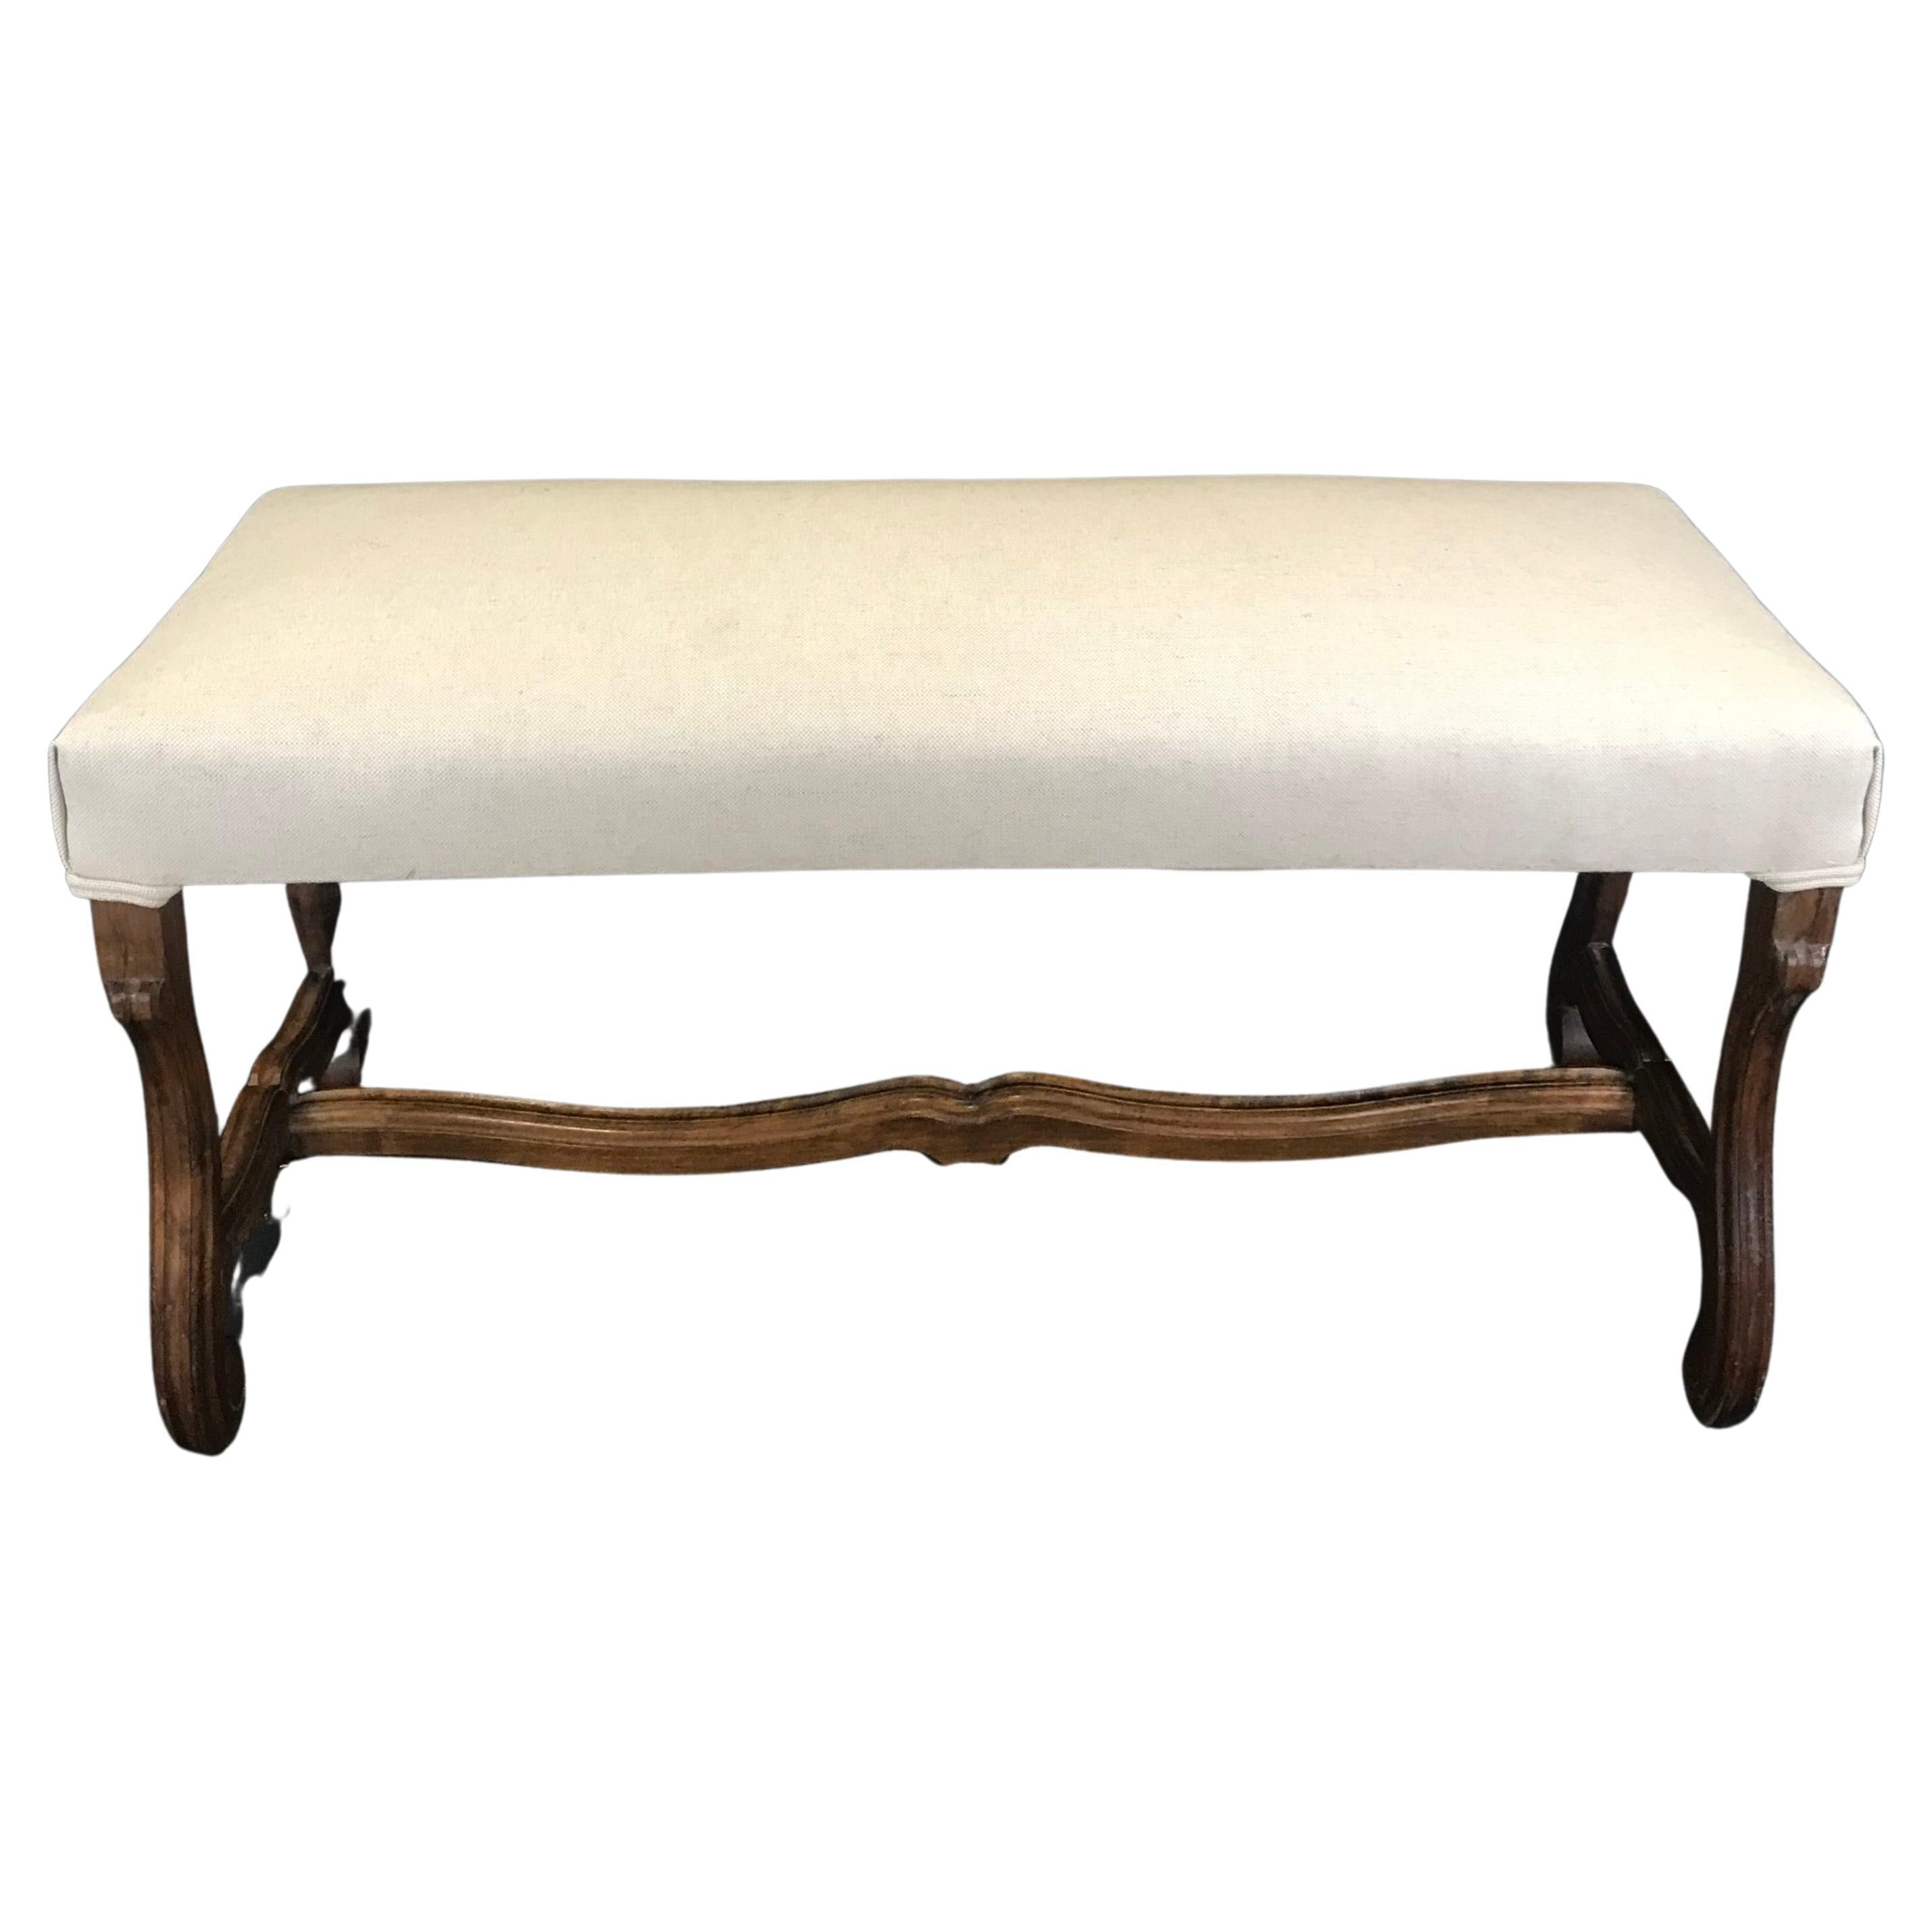 Elegant Louis XIV Early 19th Century Carved Walnut Bench